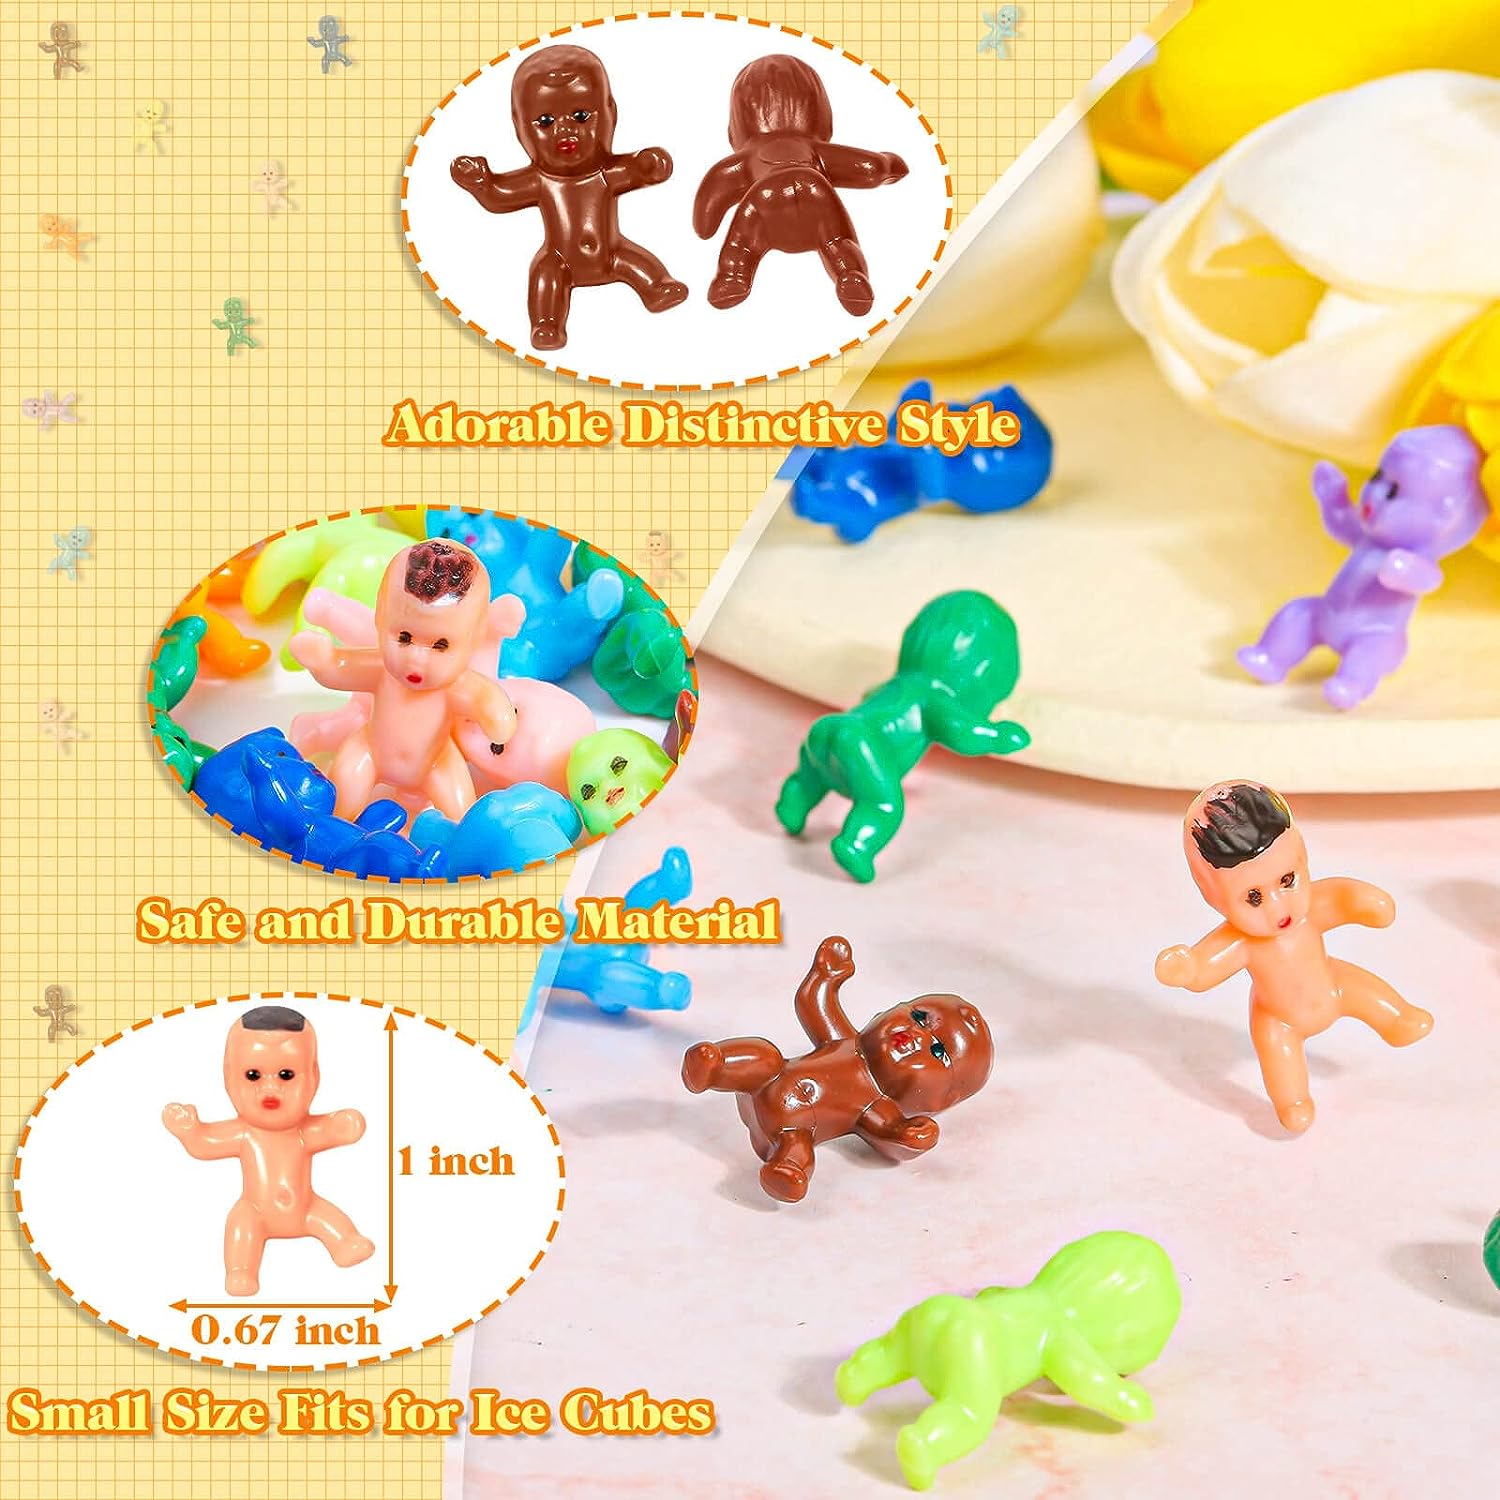 50 Pieces Mini Plastic Babies Baby Figurines Mini Babies Tiny Babies  Plastic Mini Dolls Little King Cake Babies for Ice Cube Babies Party Favors